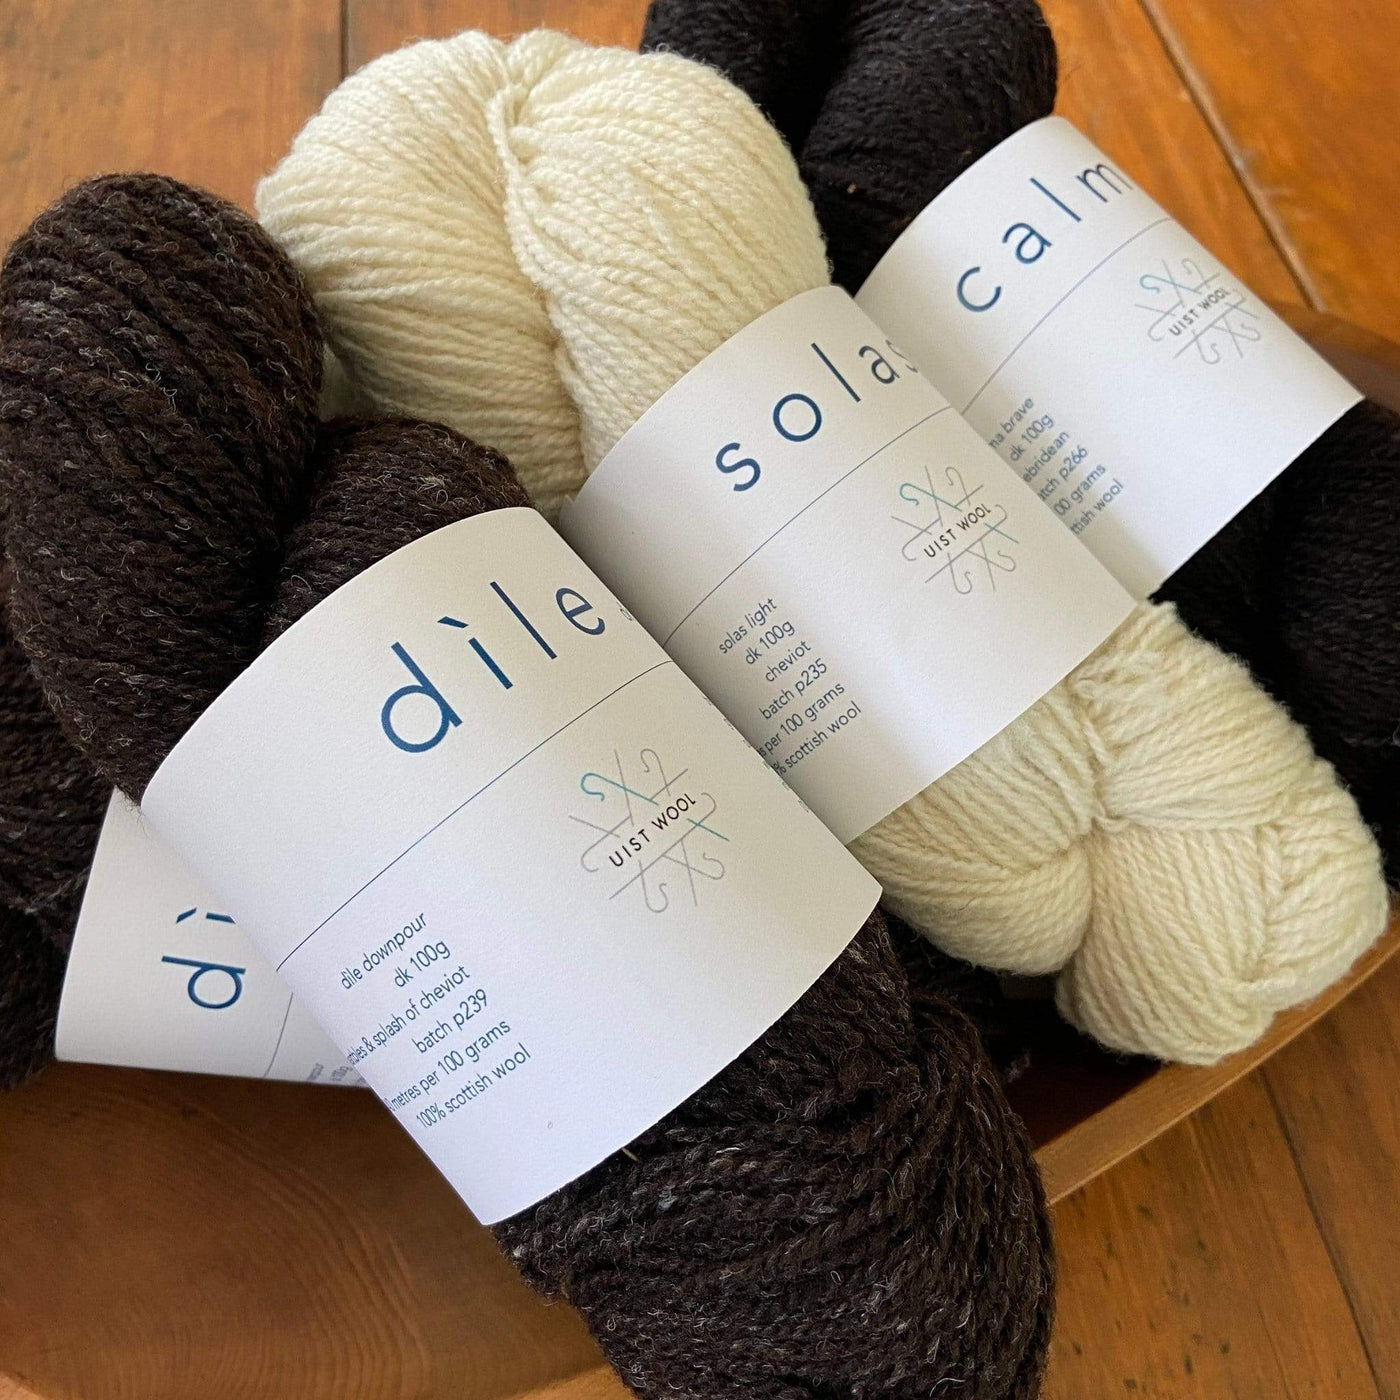 The Woolly Thistle Uist Wool DK yarn in black and cream colors